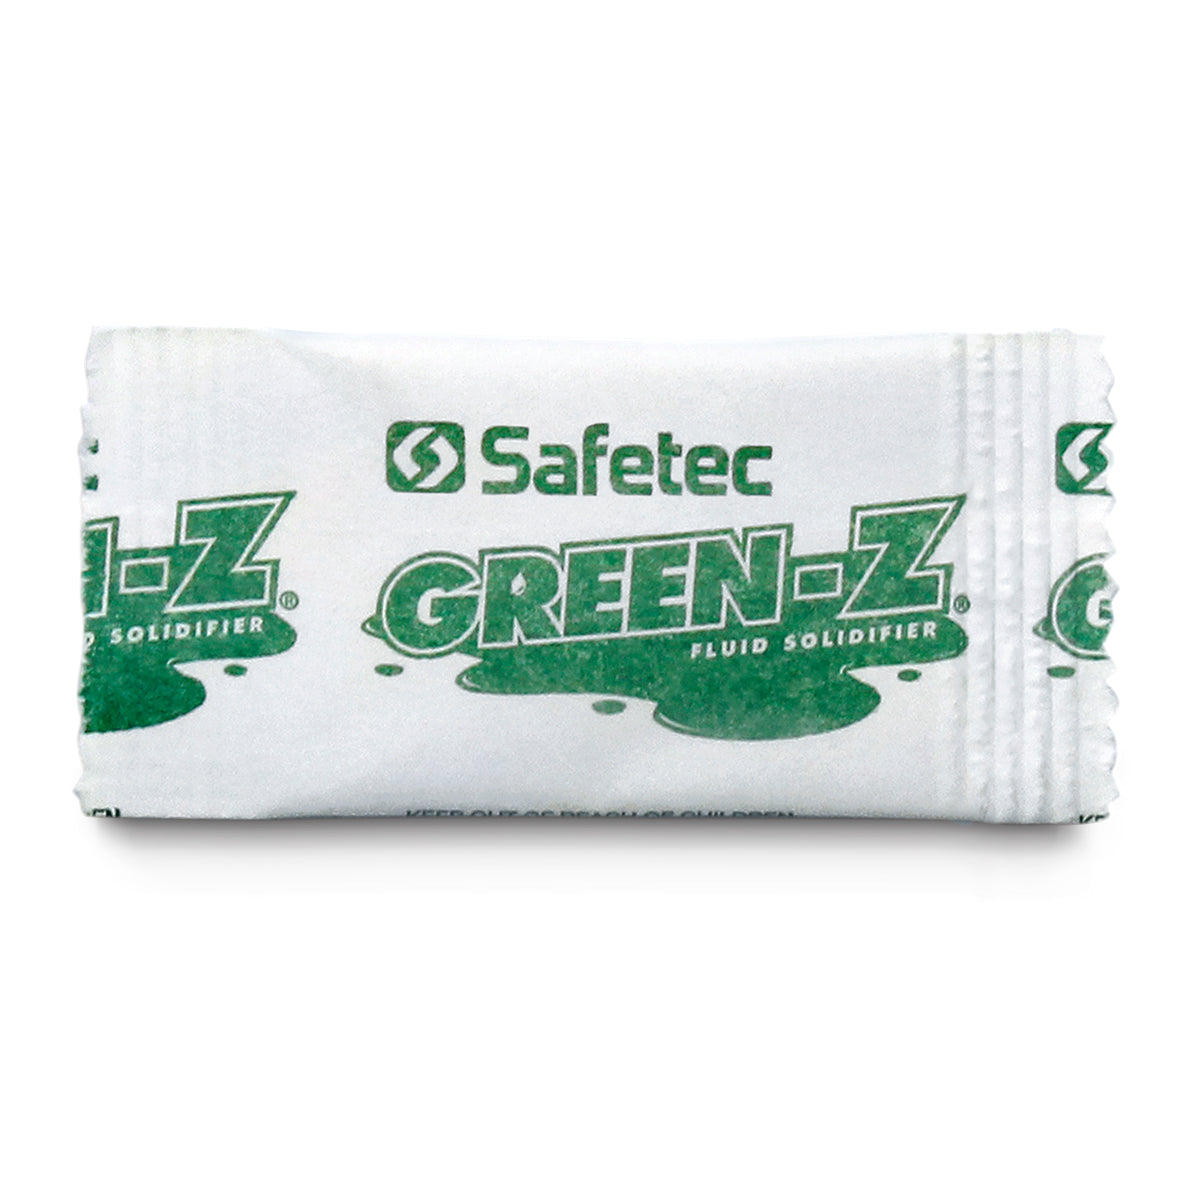 SafeTec- Green-Z® Spill Control Solidifier Zafety Pacs - 2g data-zoom=